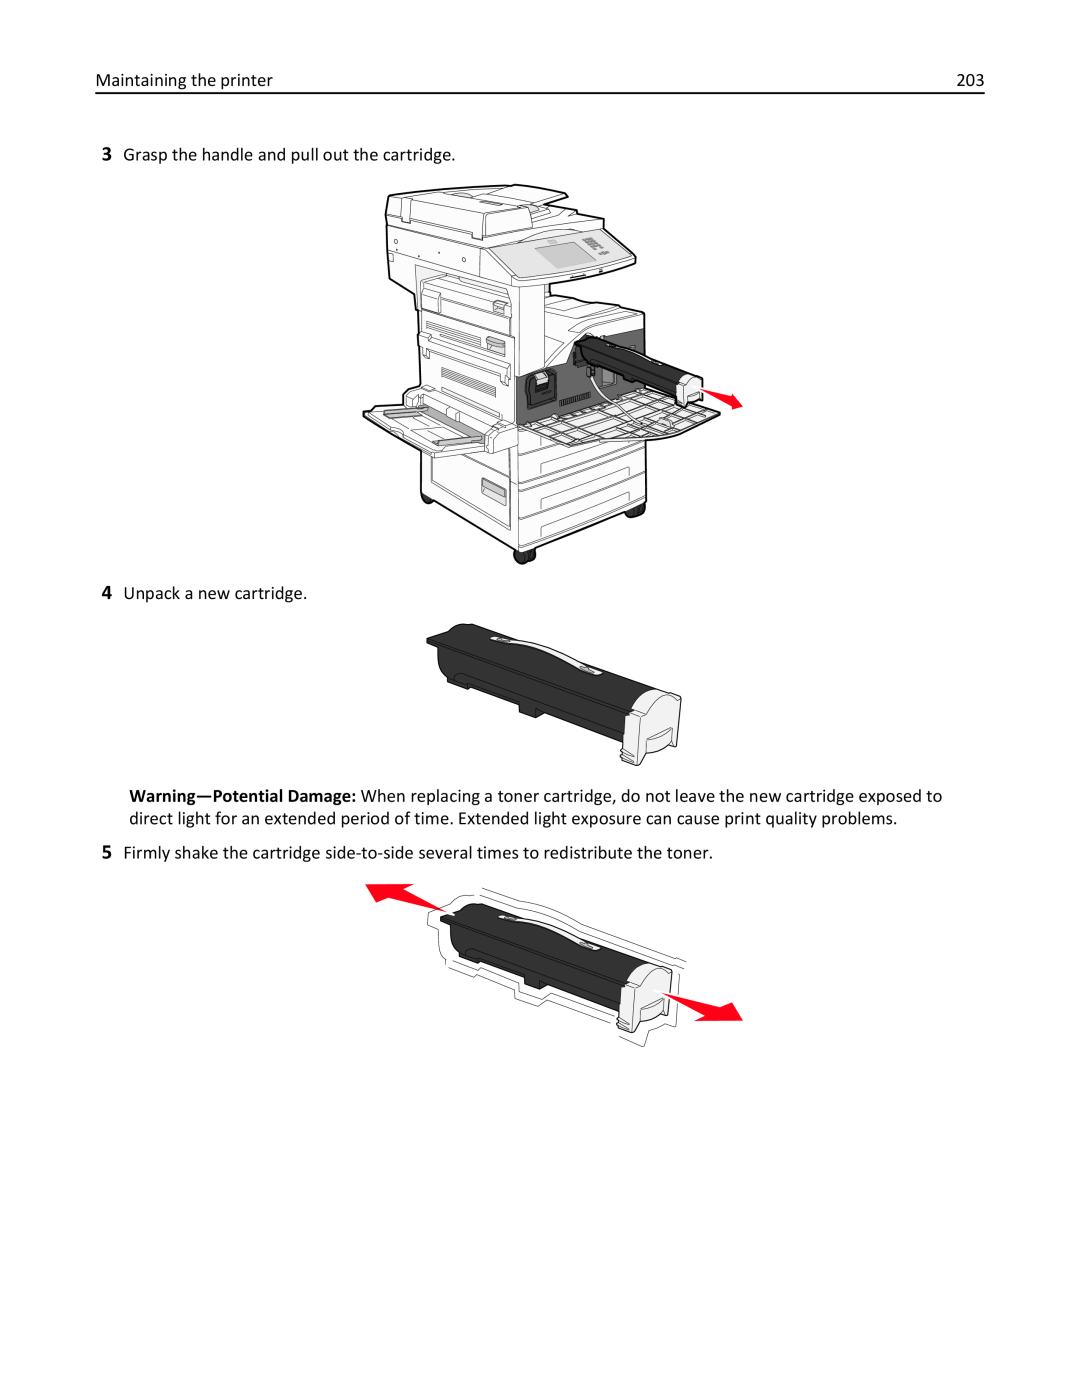 Lexmark X862DE, 432, 19Z0101 Maintaining the printer, Grasp the handle and pull out the cartridge, Unpack a new cartridge 